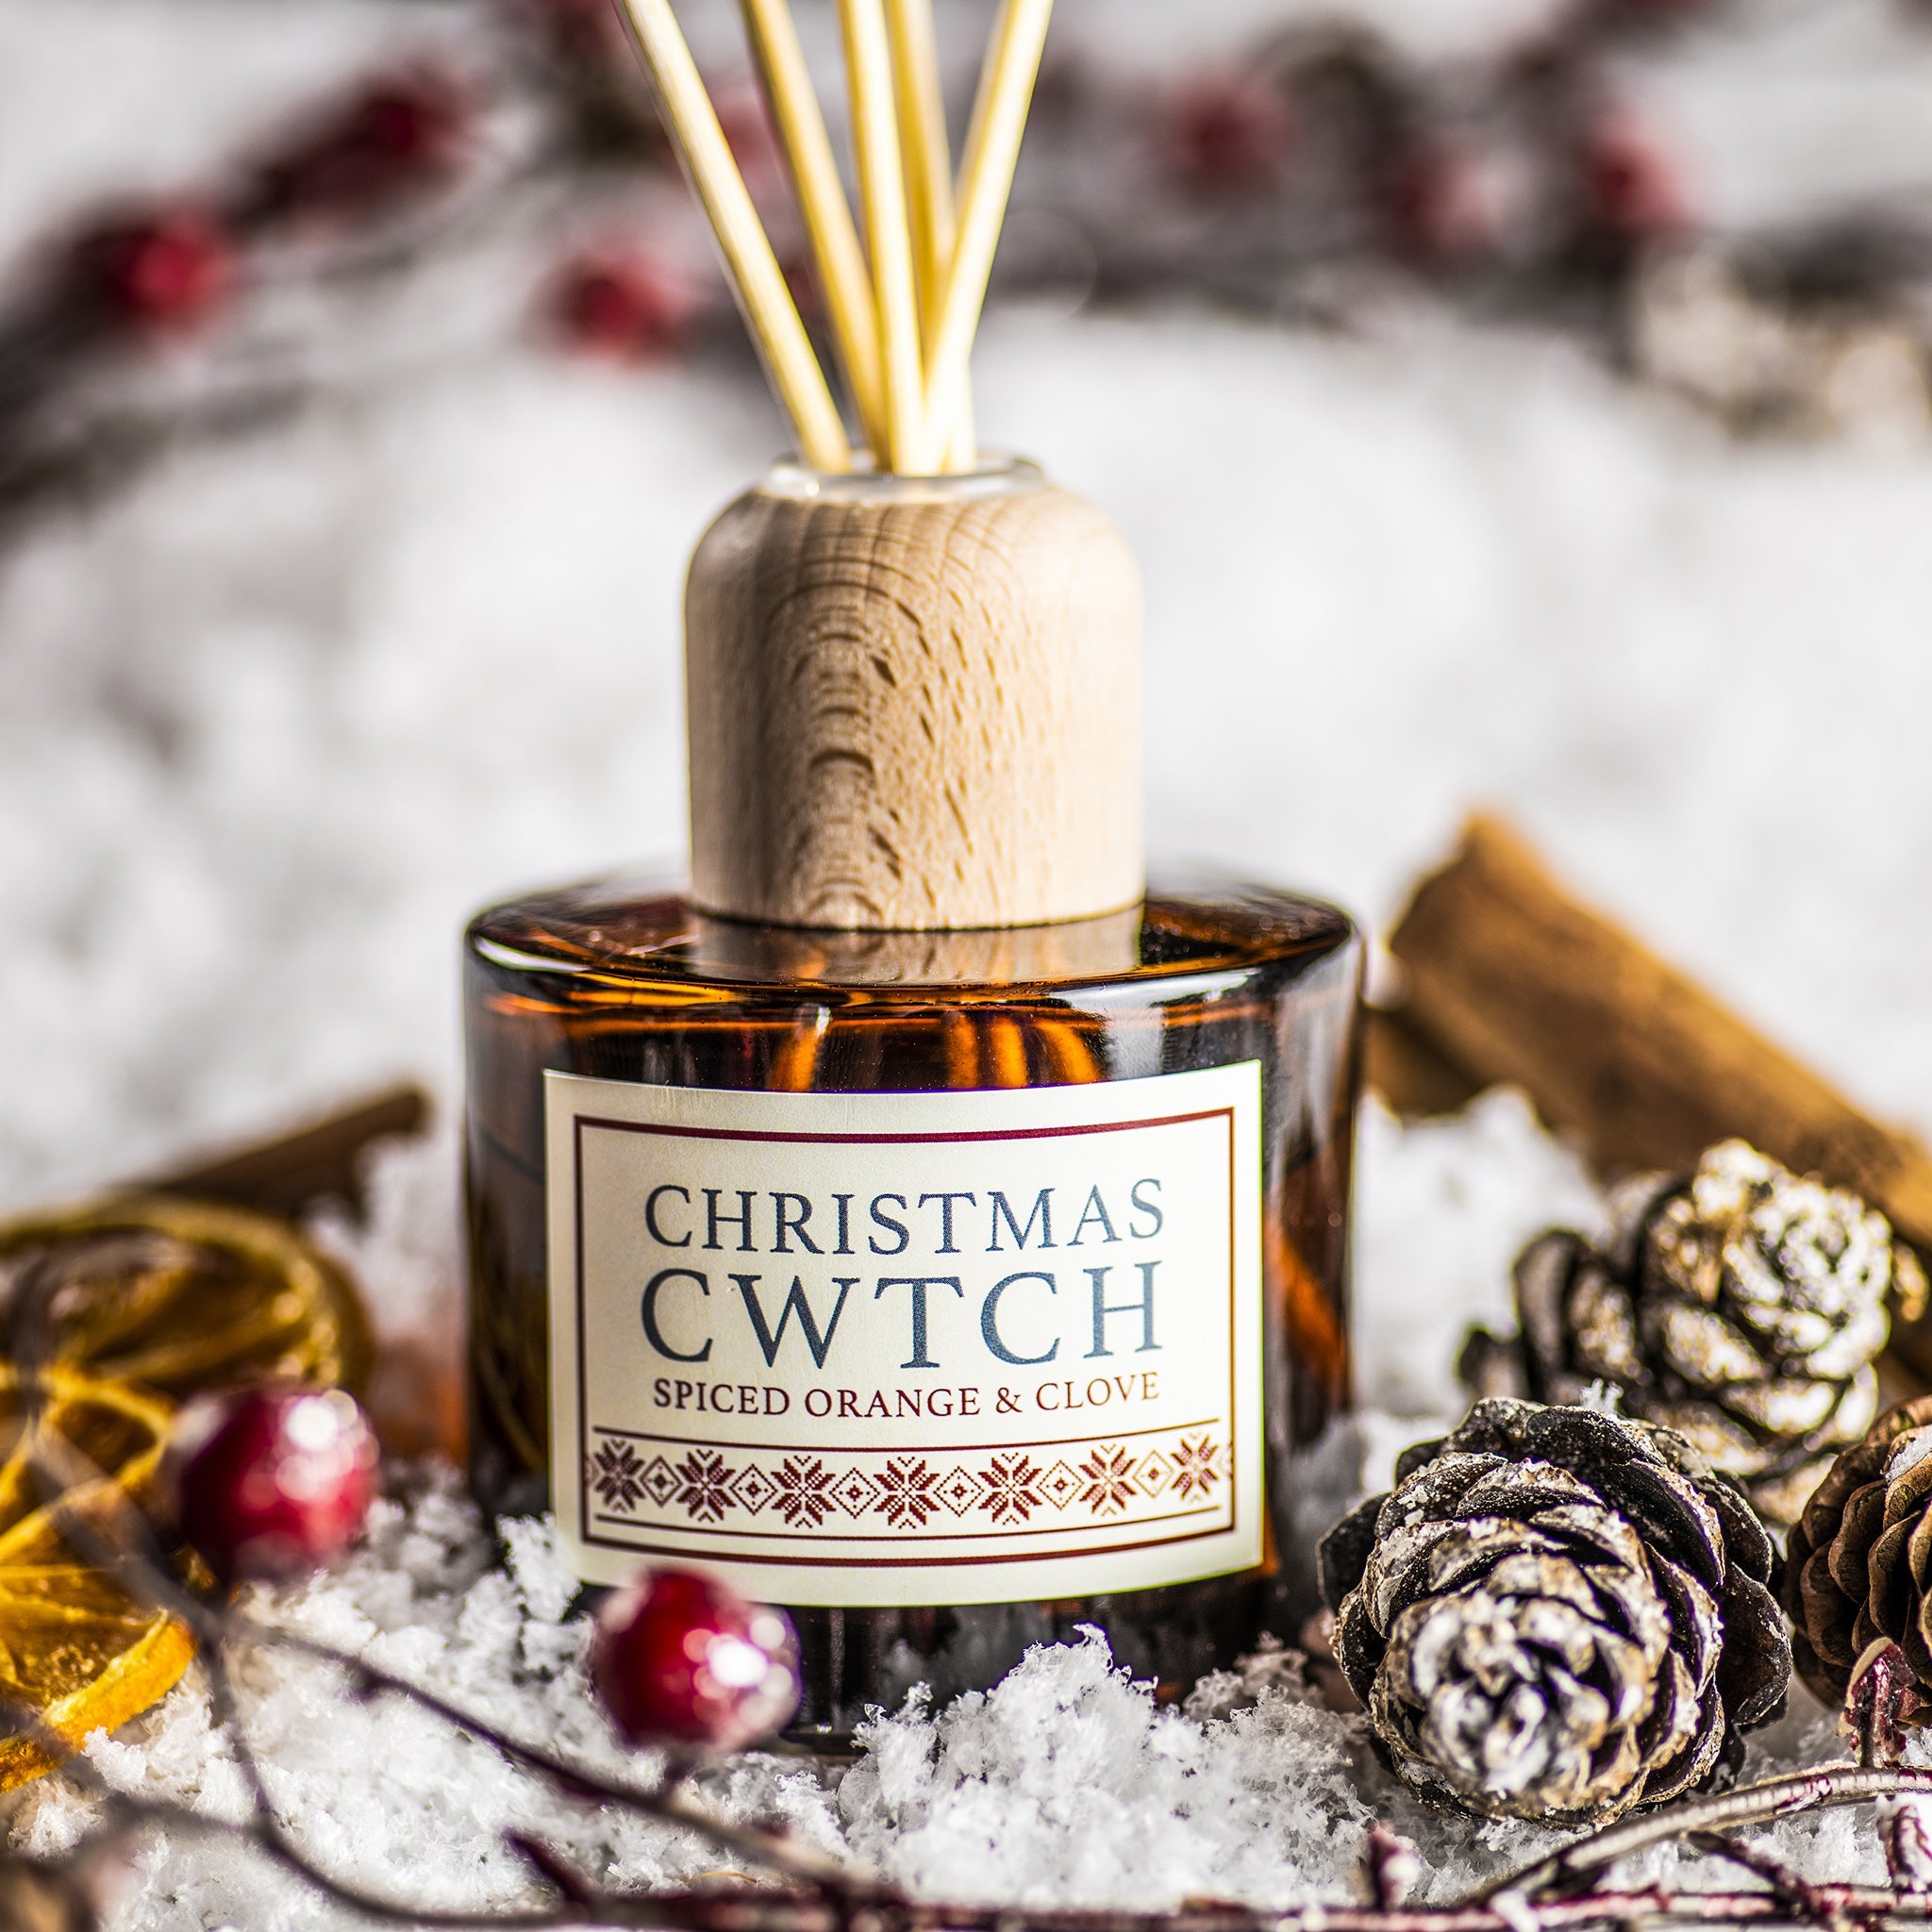 Christmas Cwtch | Reed Diffuser with Spiced Orange & Clove